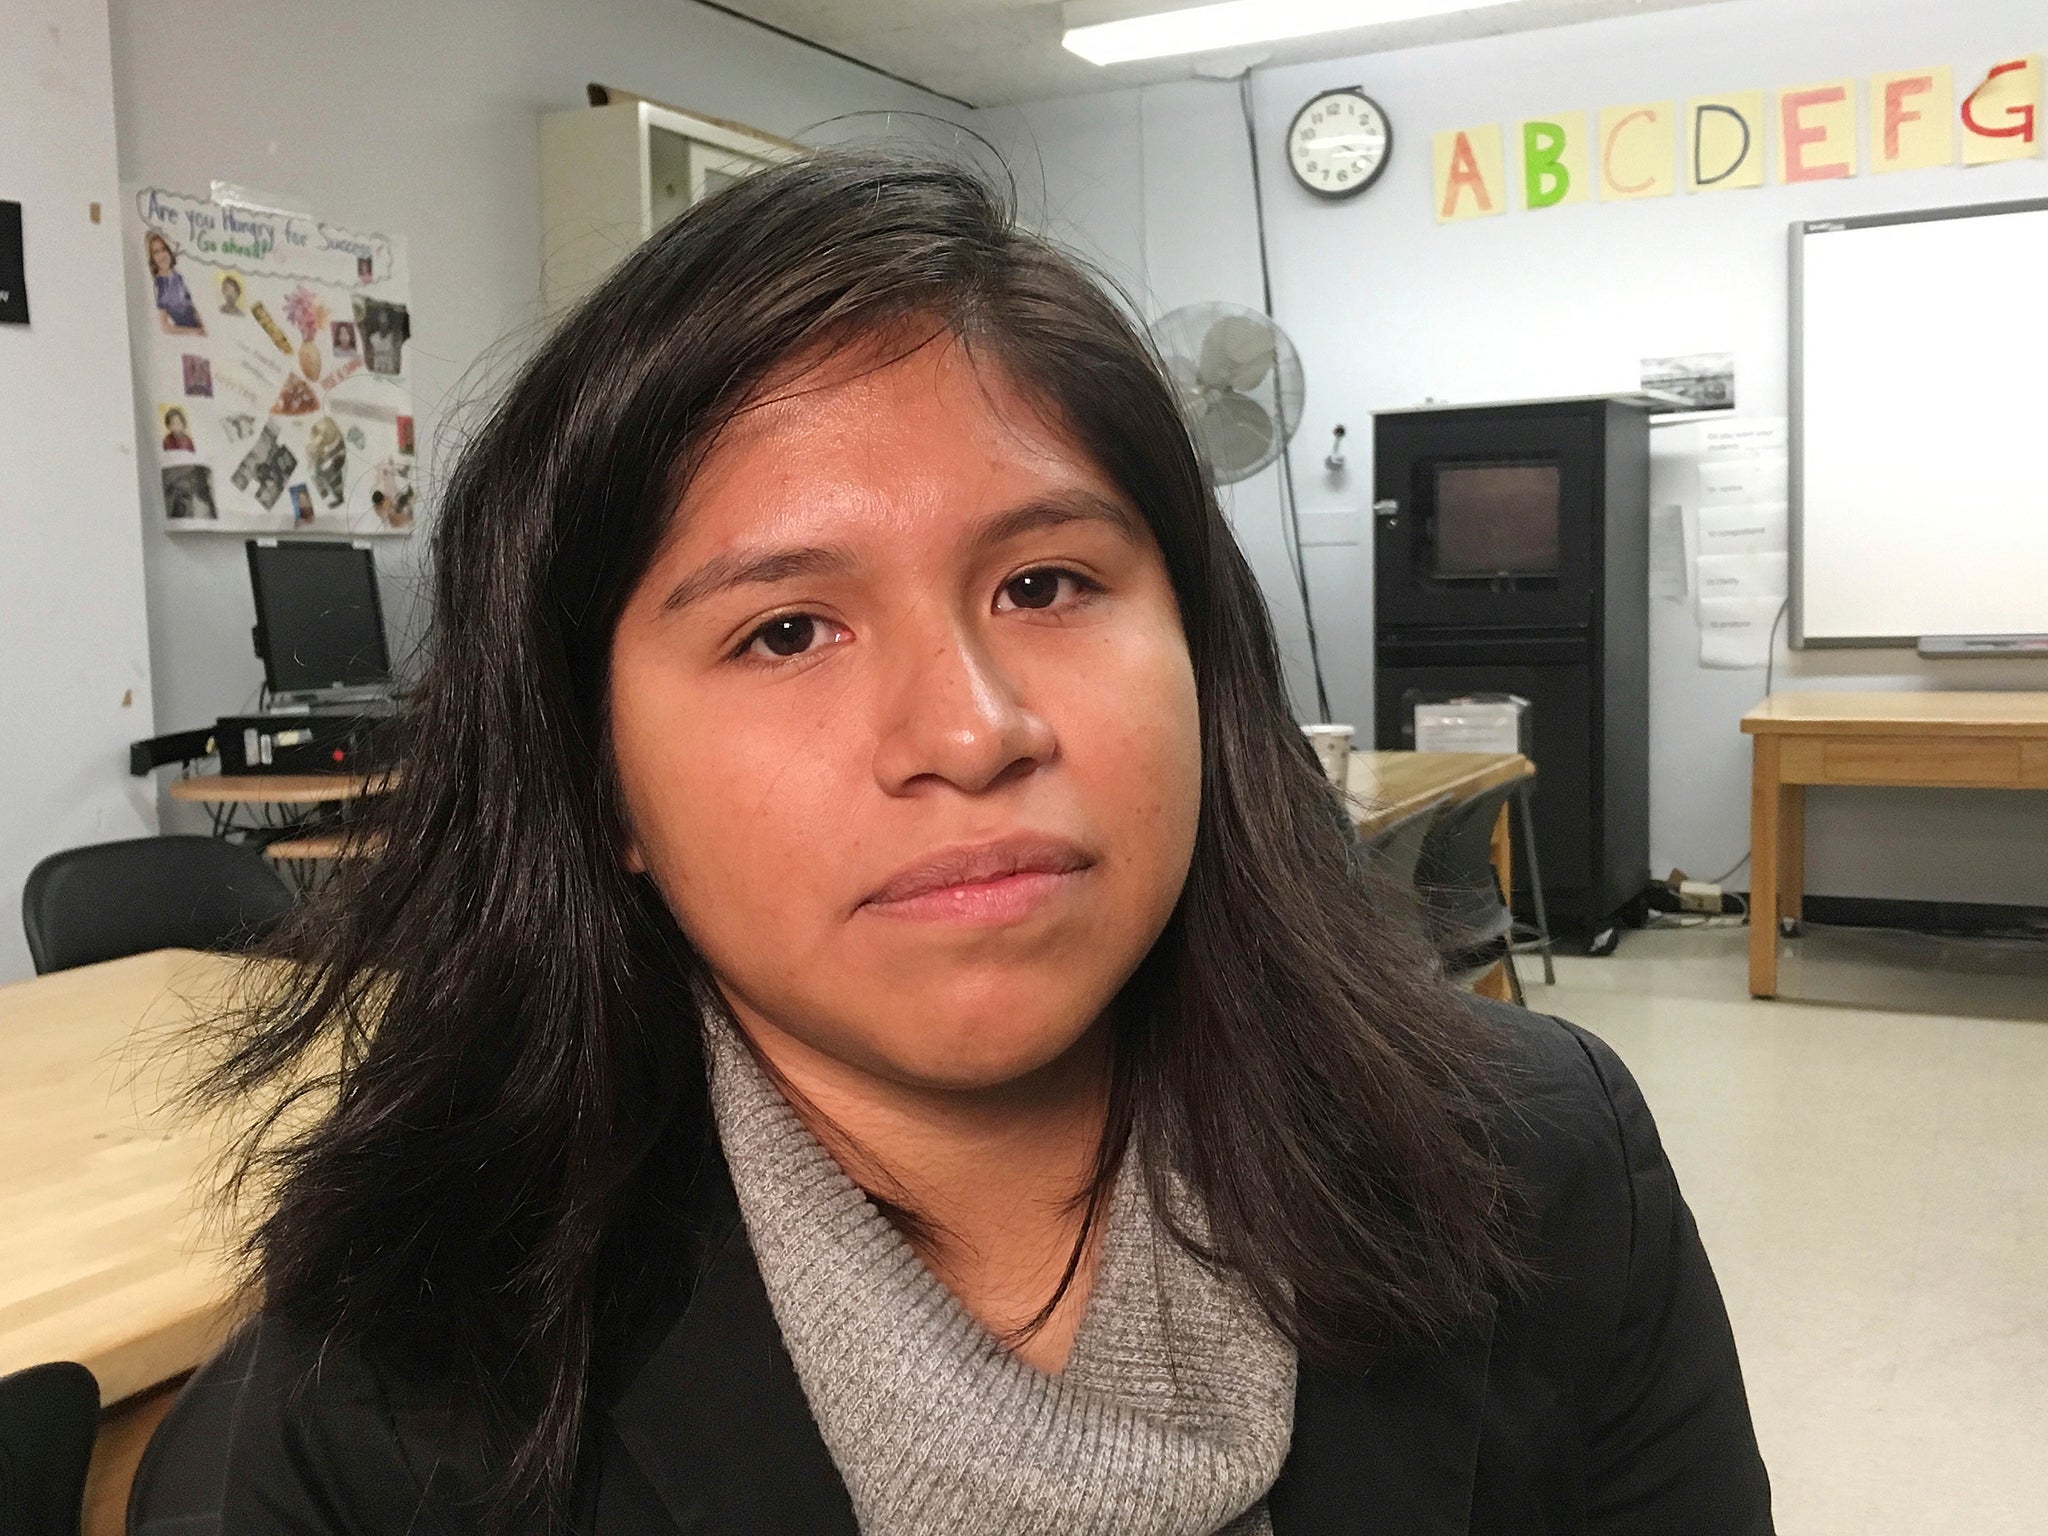 Nancy Lopez-Ramirez, 20, from Mexico, discusses her travel plans at City College of New York